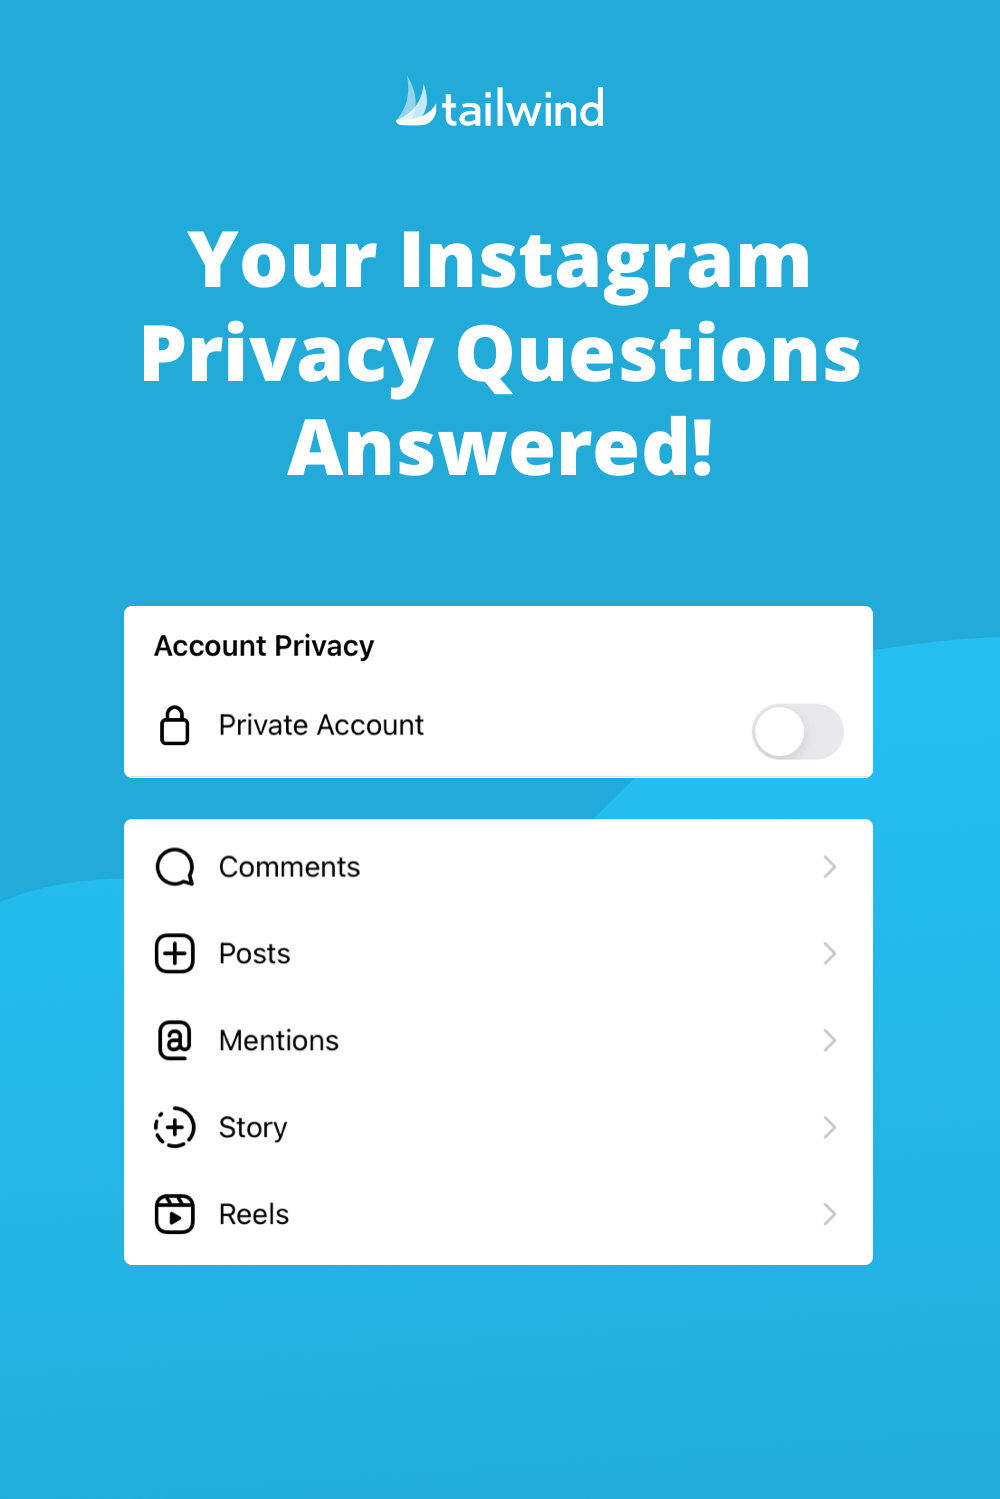 Your Instagram Privacy Questions Answered!